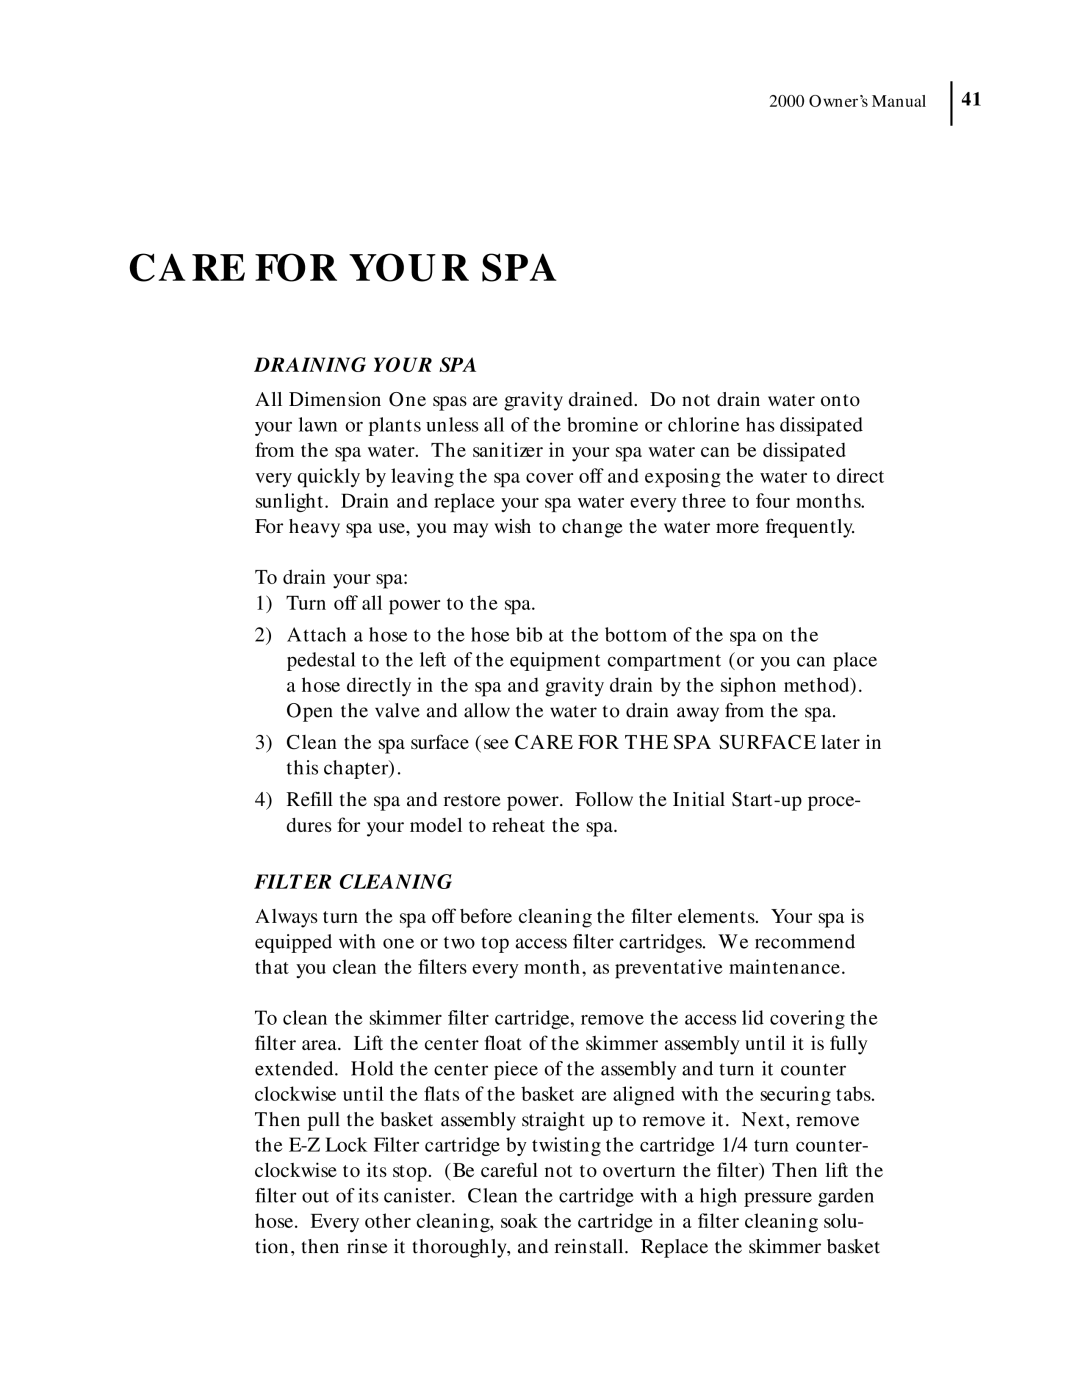 Dimension One Spas 2000 Model manual Care For Your Spa, Draining Your Spa, Filter Cleaning 